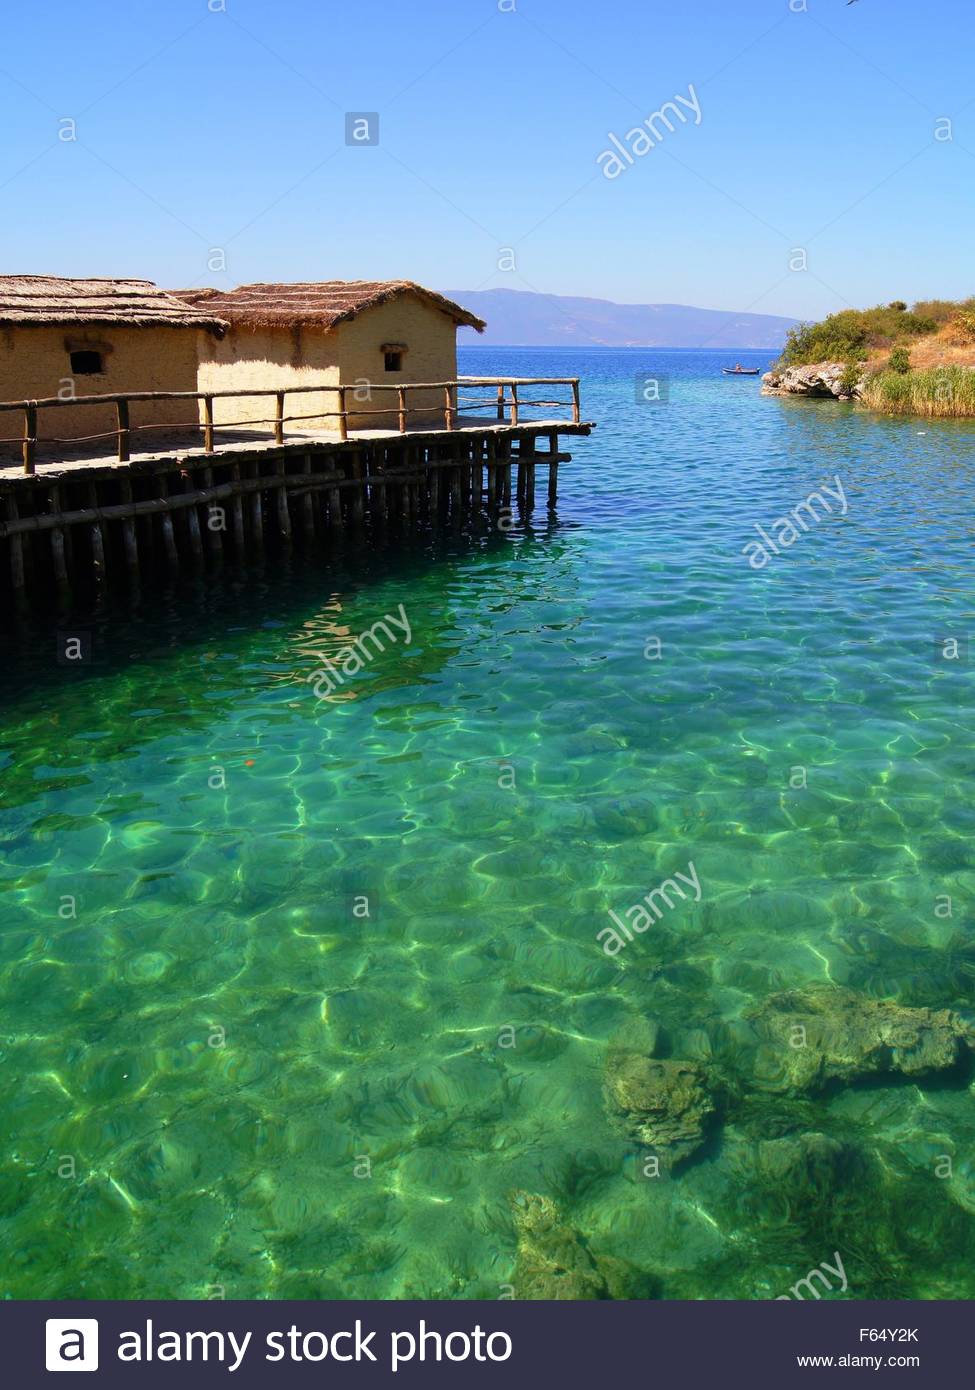 turquoise-water-of-the-lake-ohrid-macedonia-photo-taken-in-the-bay-F64Y2K.jpg